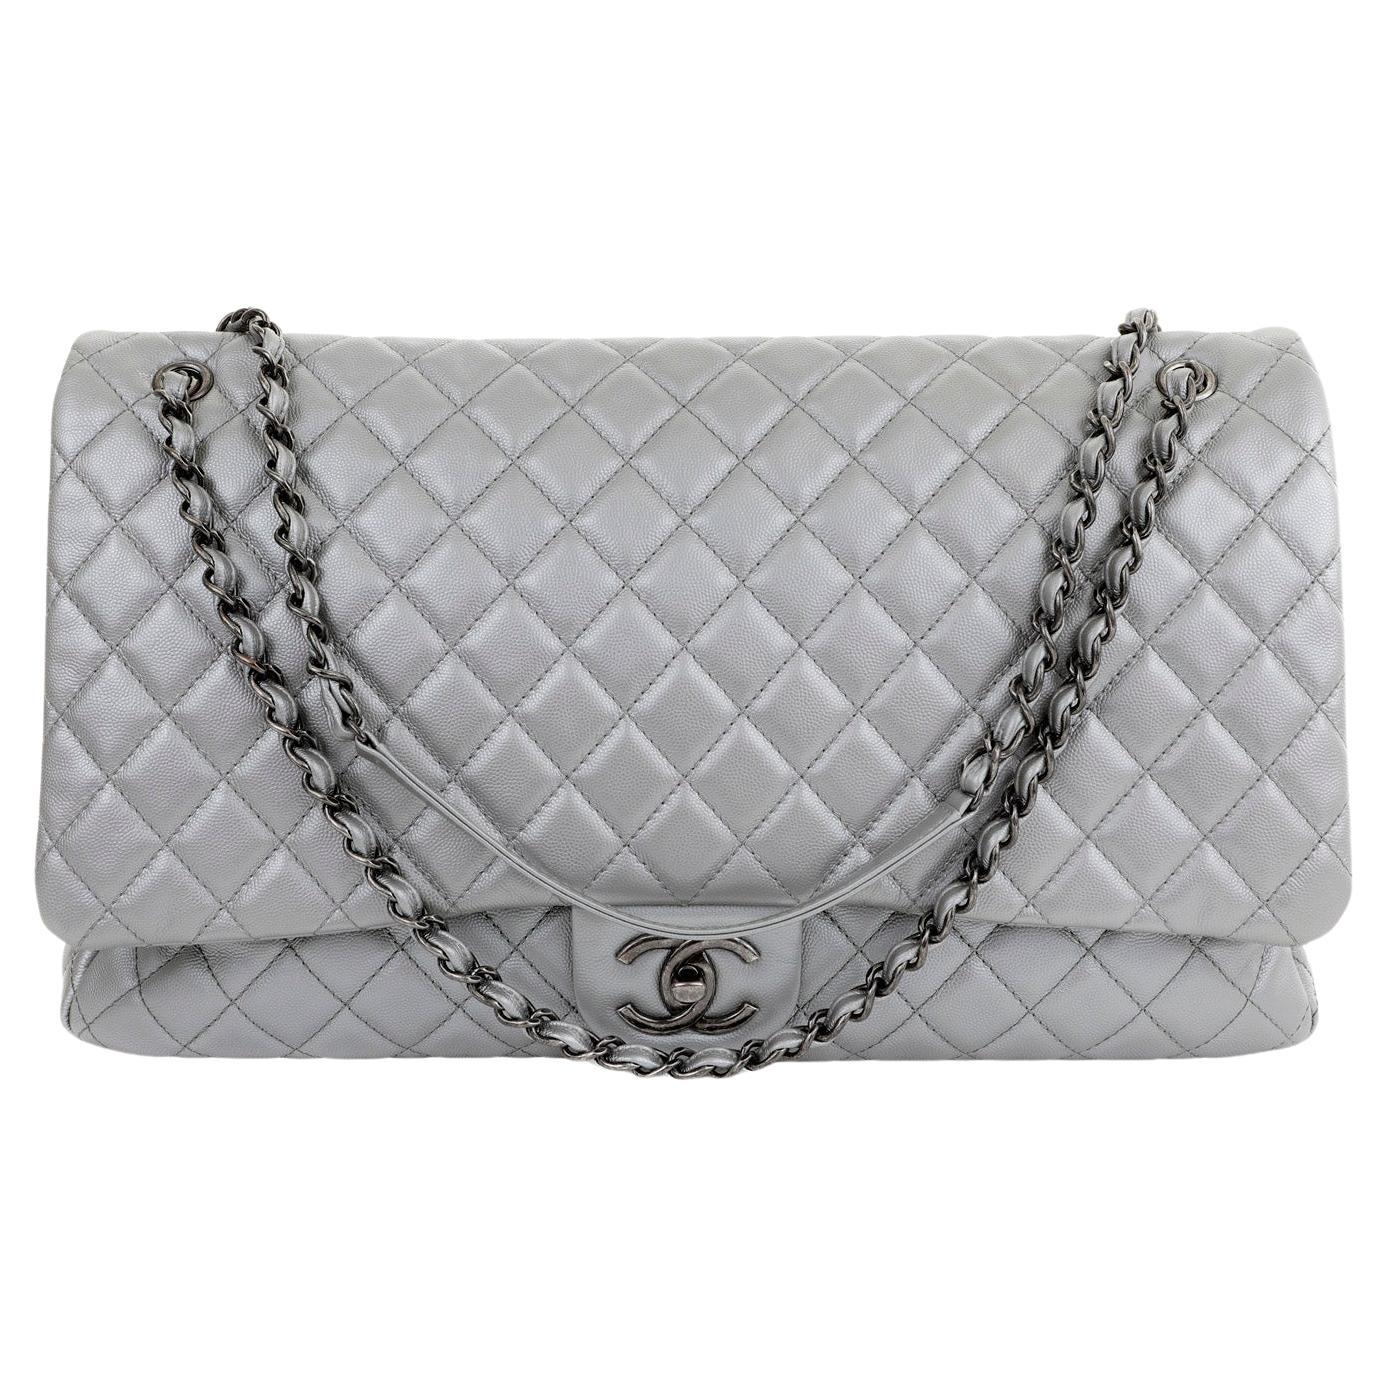 Chanel Silver Caviar Classic Travel Xxl Flap Bag With Ruthenium For Sale At  1Stdibs | Chanel Xxl Travel Bag, Xxl Chanel Bag, Chanel Xxl Flap Bag